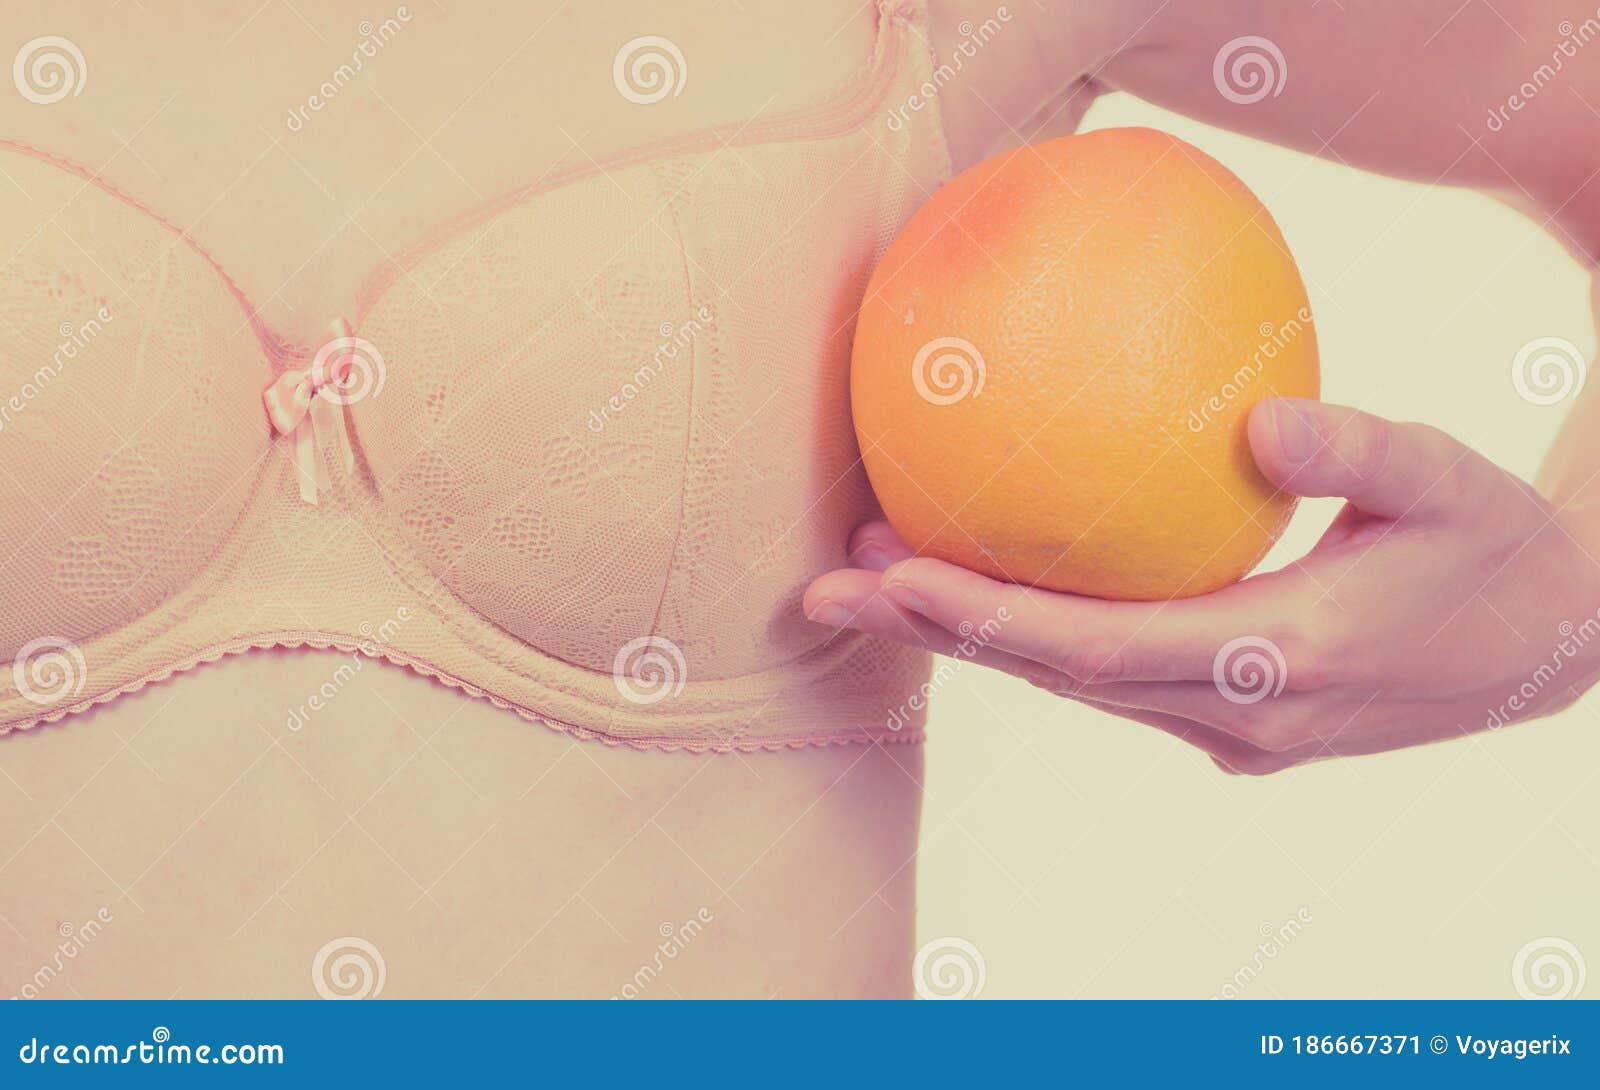 Woman Small Boobs Holds Big Orange Fruits Stock Image - Image of  enlargement, care: 186667371